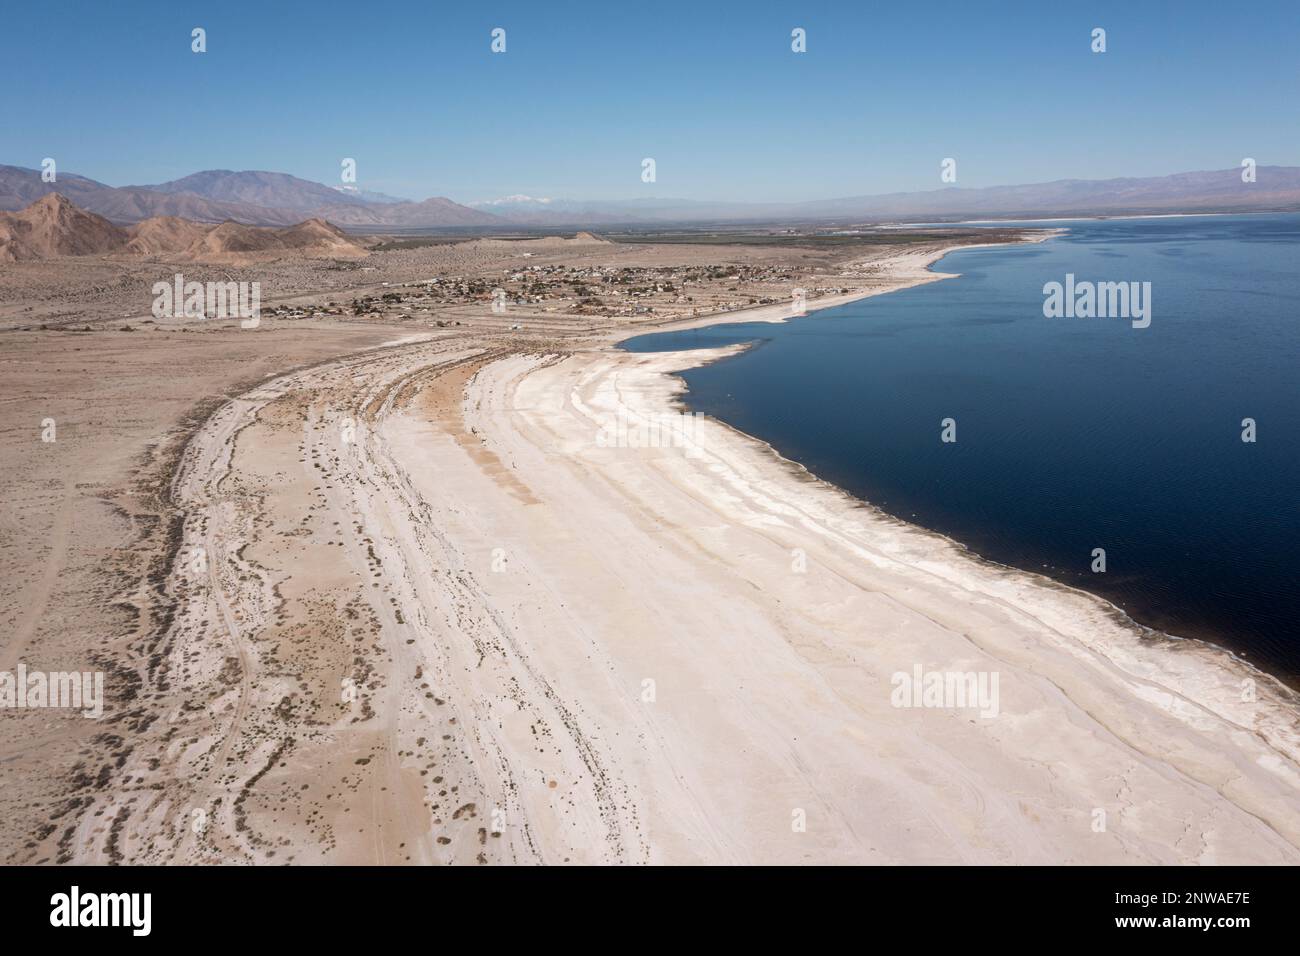 California's Salton Sea is rapidly shrinking amid persistent drought. Toxins in the newly exposed lakebed have created a major public health crisis. Stock Photo